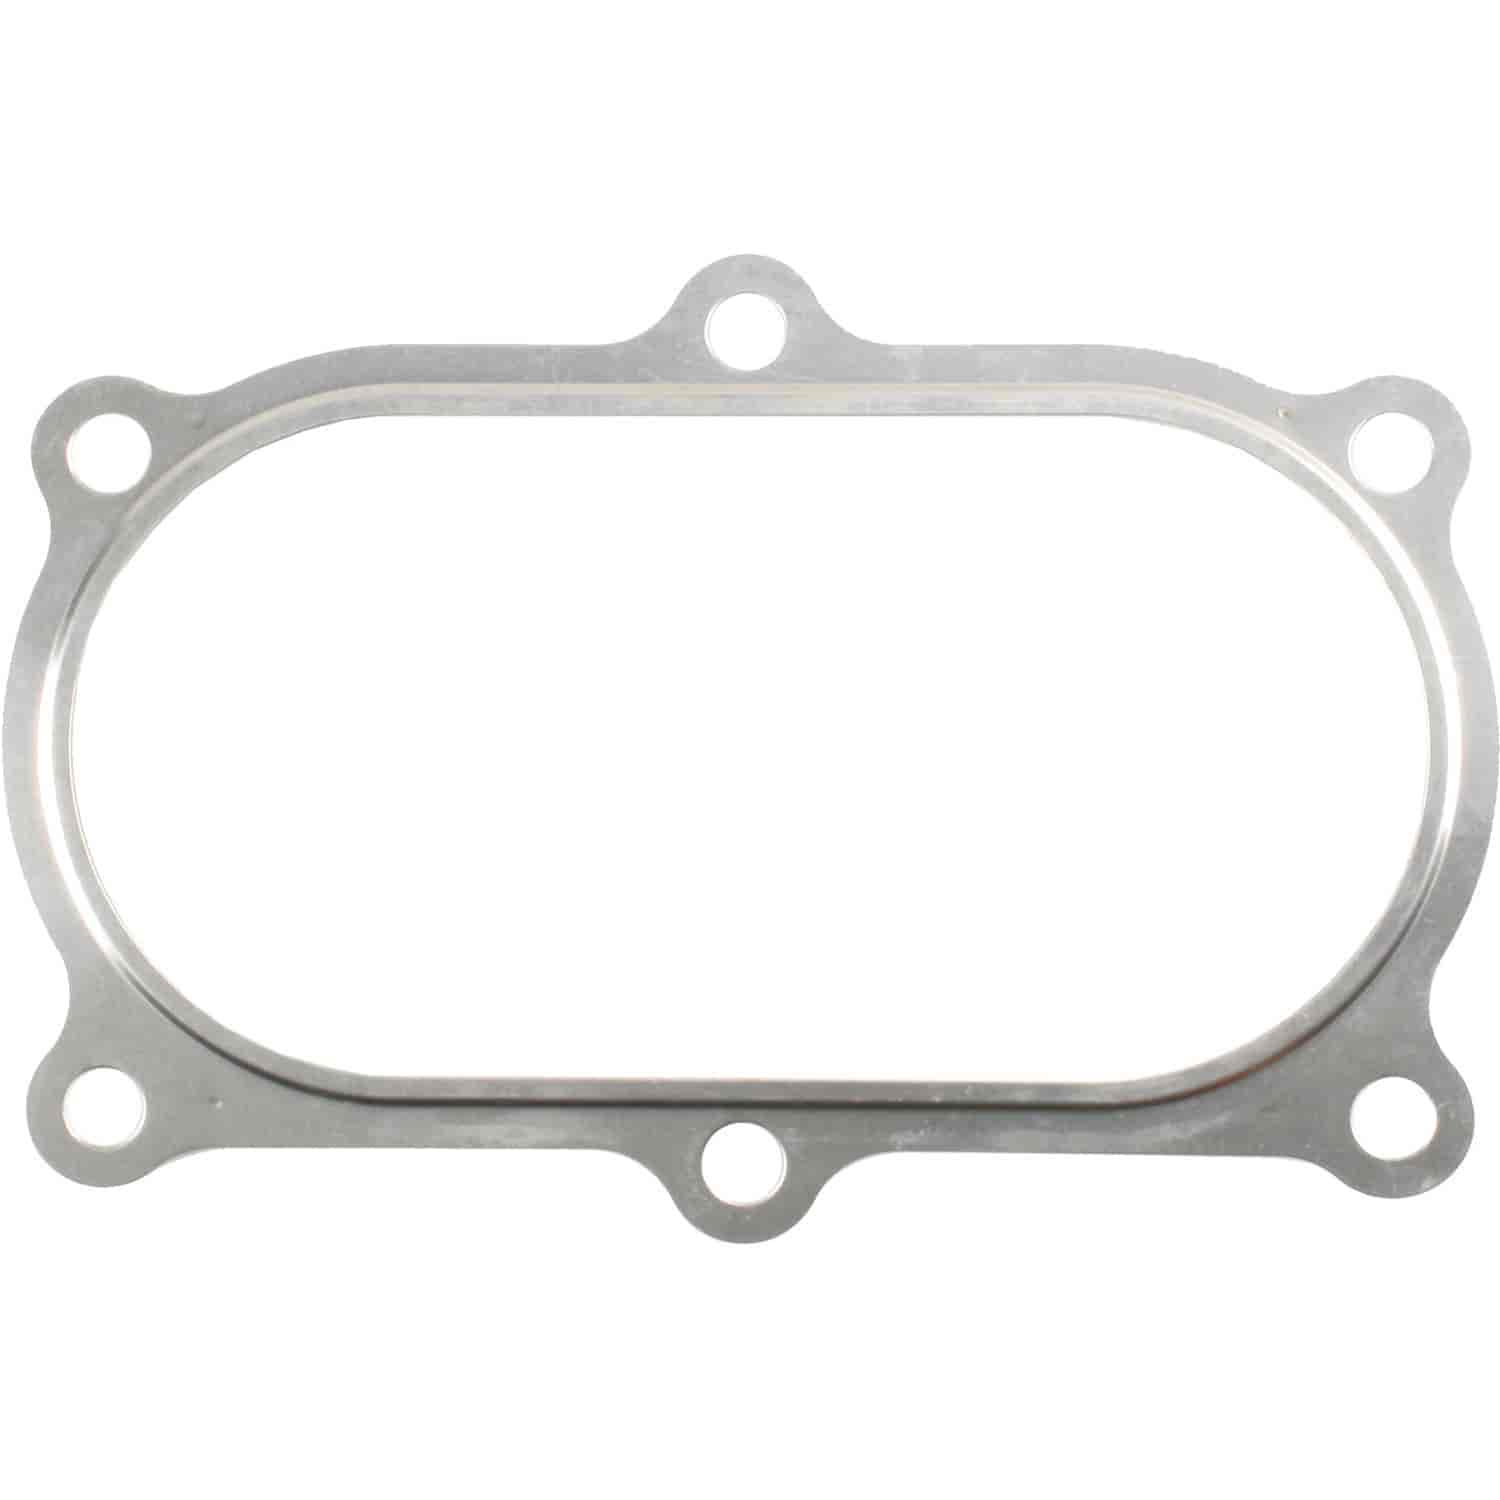 Exhaust Pipe Flange Gasket for Hyundai 1.5L SOHC 95-5/01/97 CAL From 5/01/97 to 1999 ALL